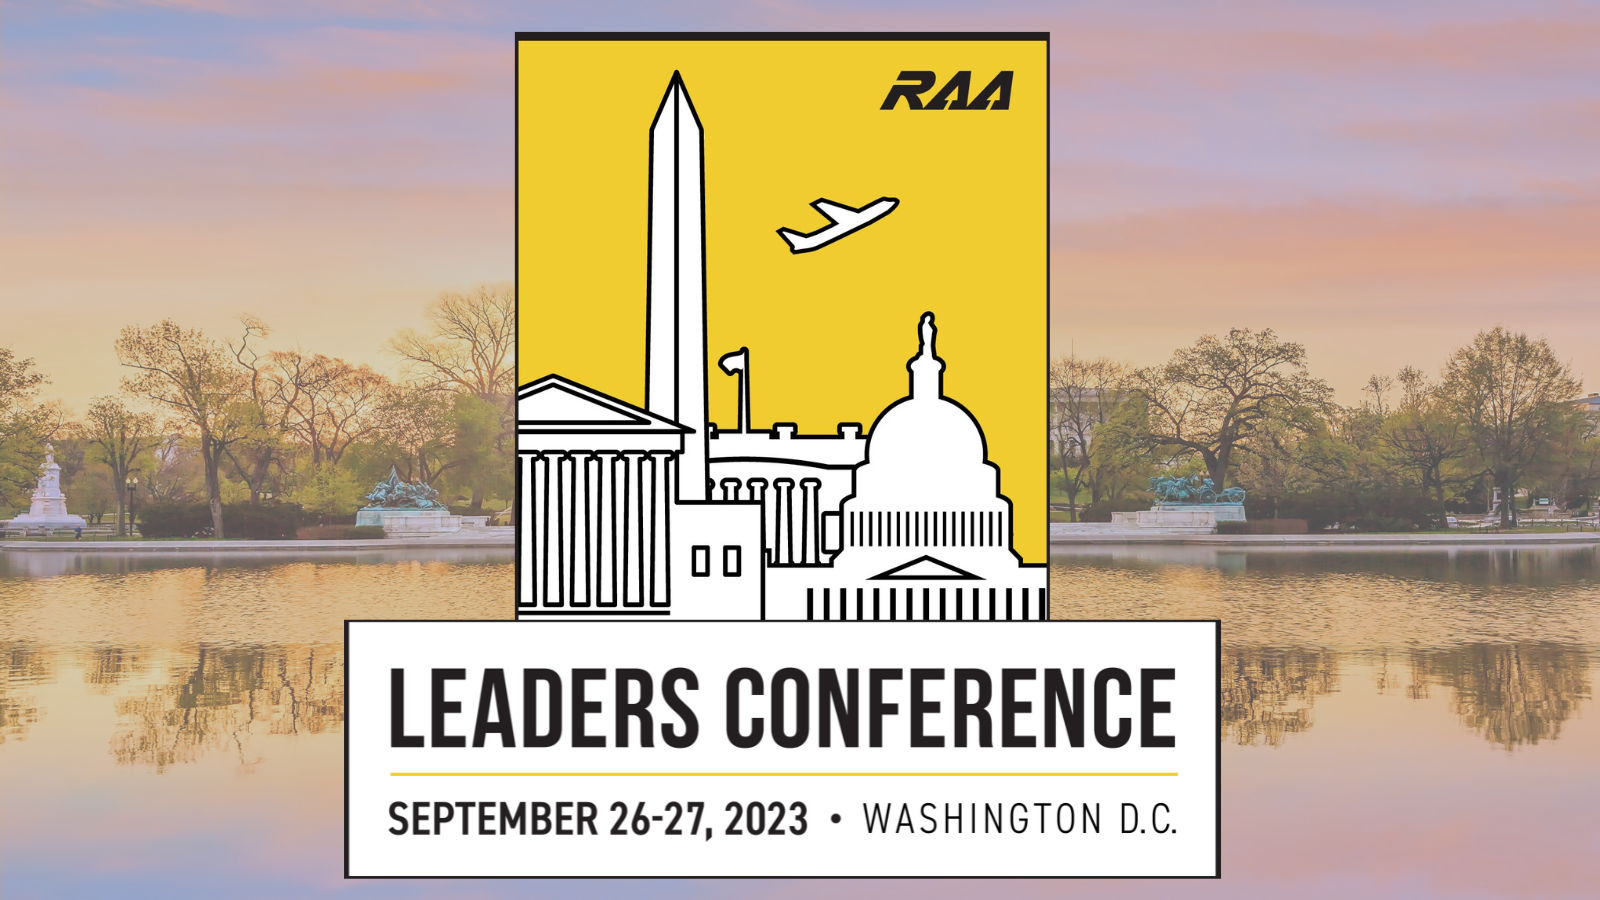 2023 RAA Leaders Conference Regional Airline Association